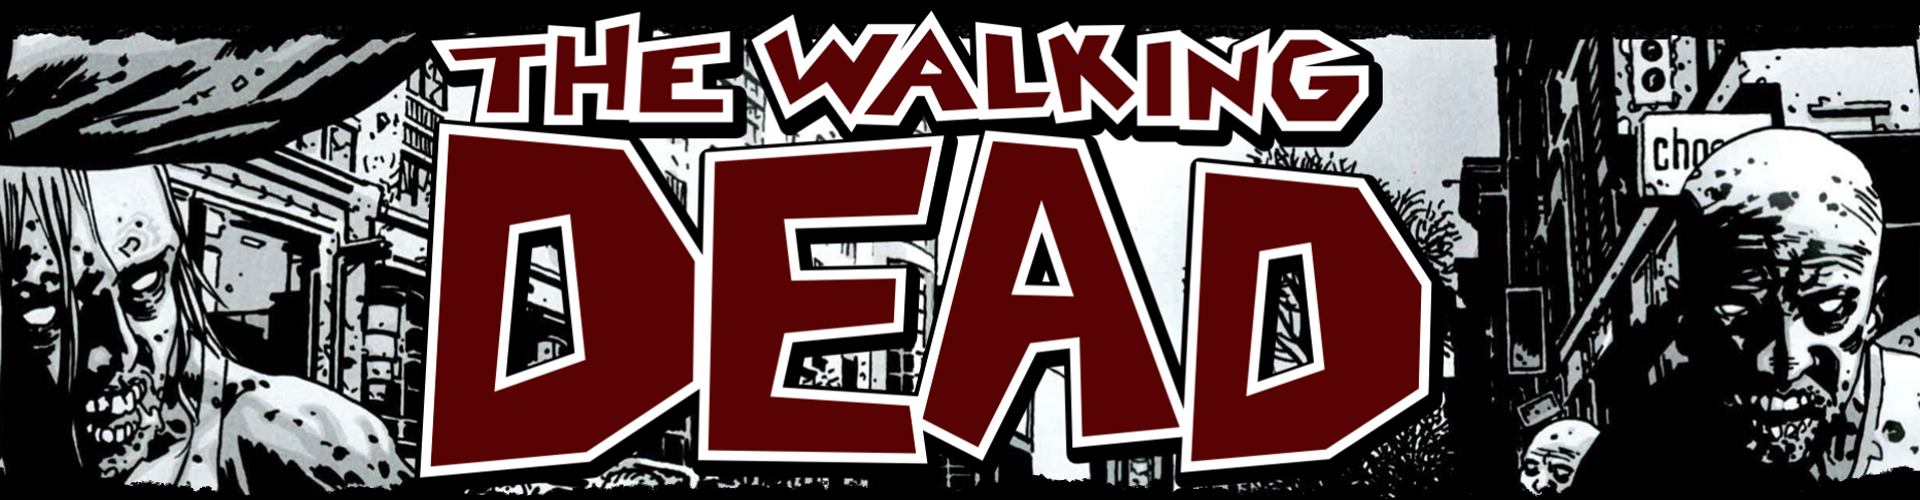 The Walking Dead. A header with the title and zombies in the background